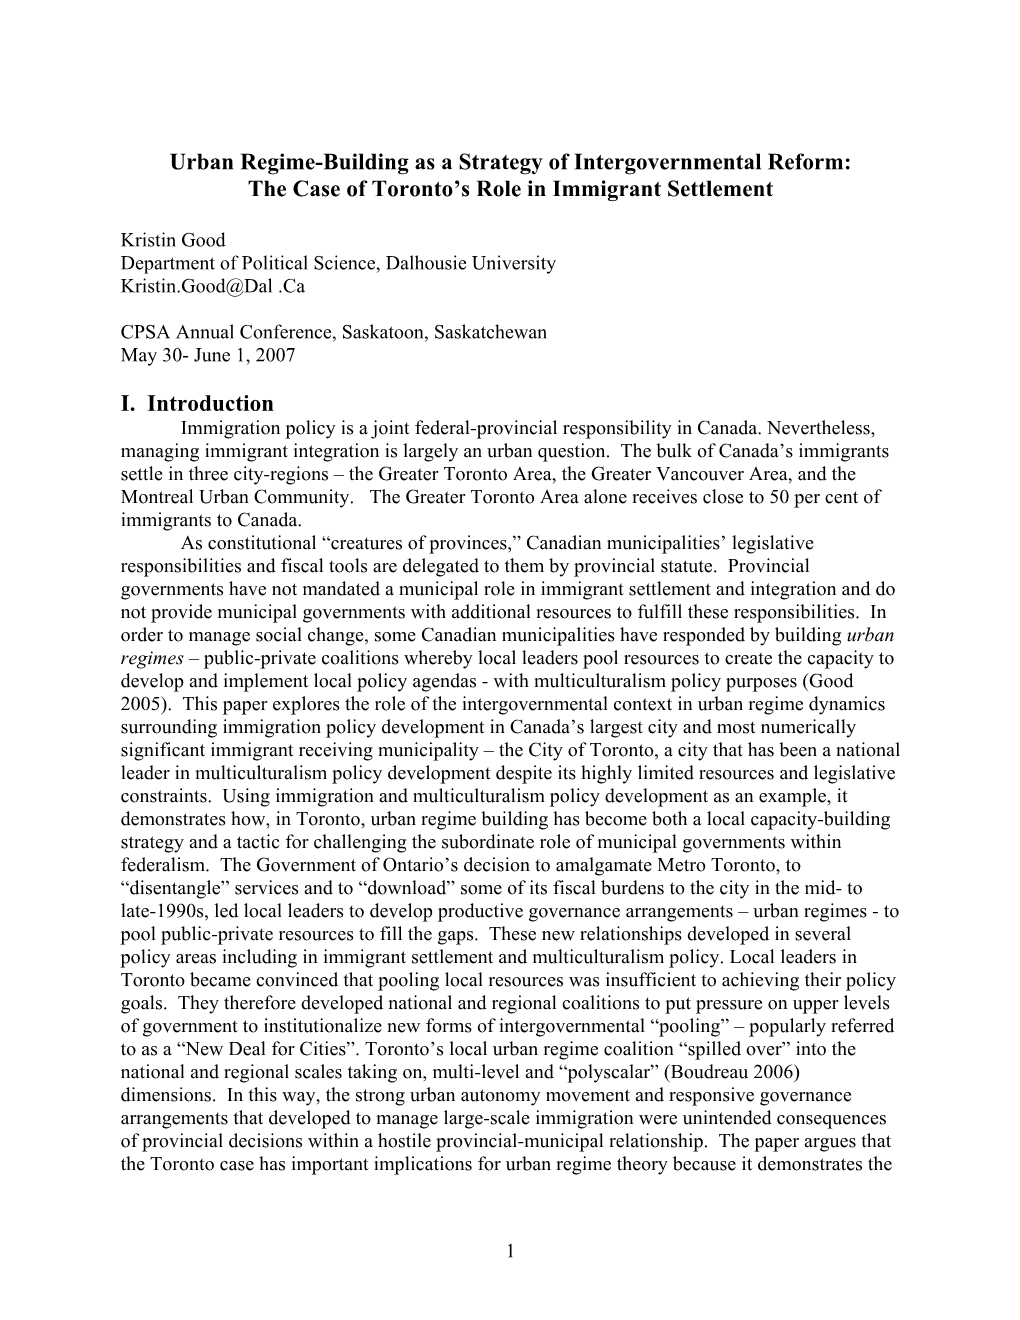 Urban Regime-Building As a Strategy of Intergovernmental Reform: the Case of Toronto’S Role in Immigrant Settlement